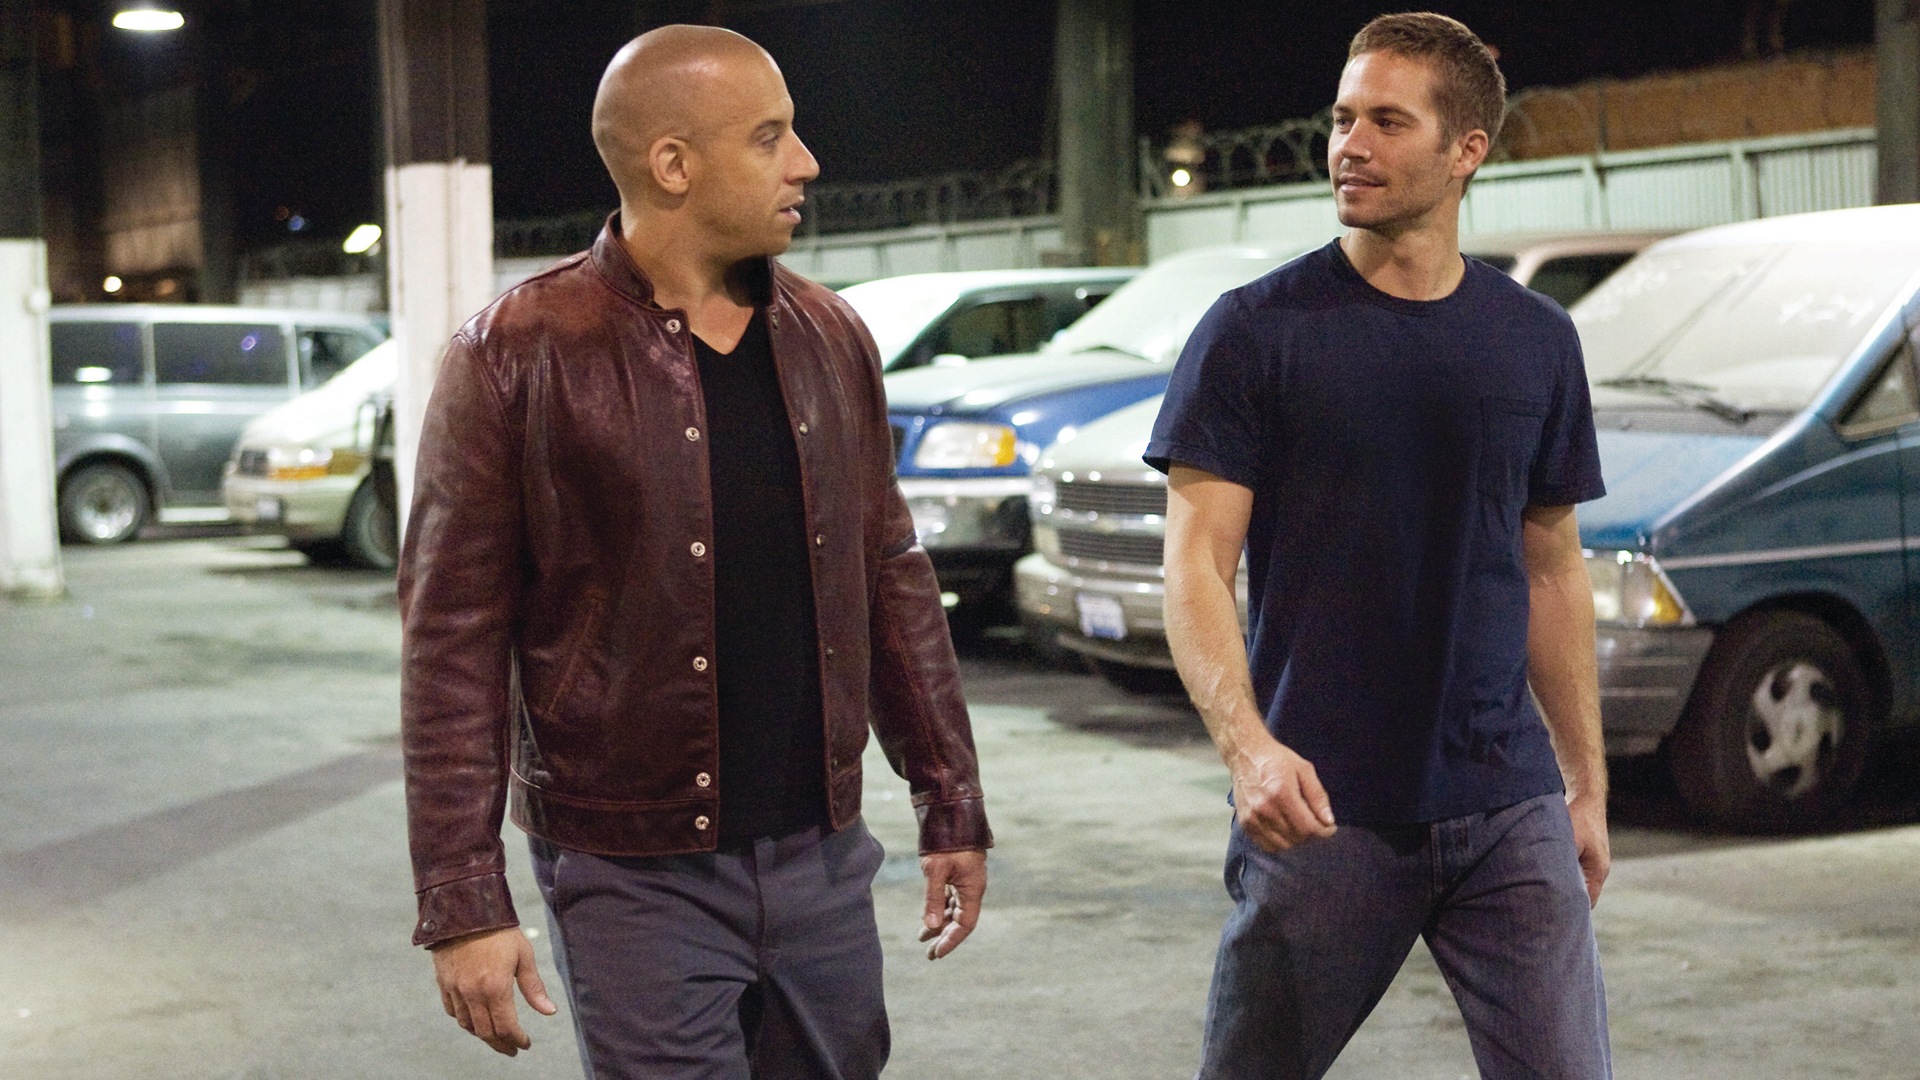 Fast and Furious 7 HD movie wallpapers #8 - 1920x1080